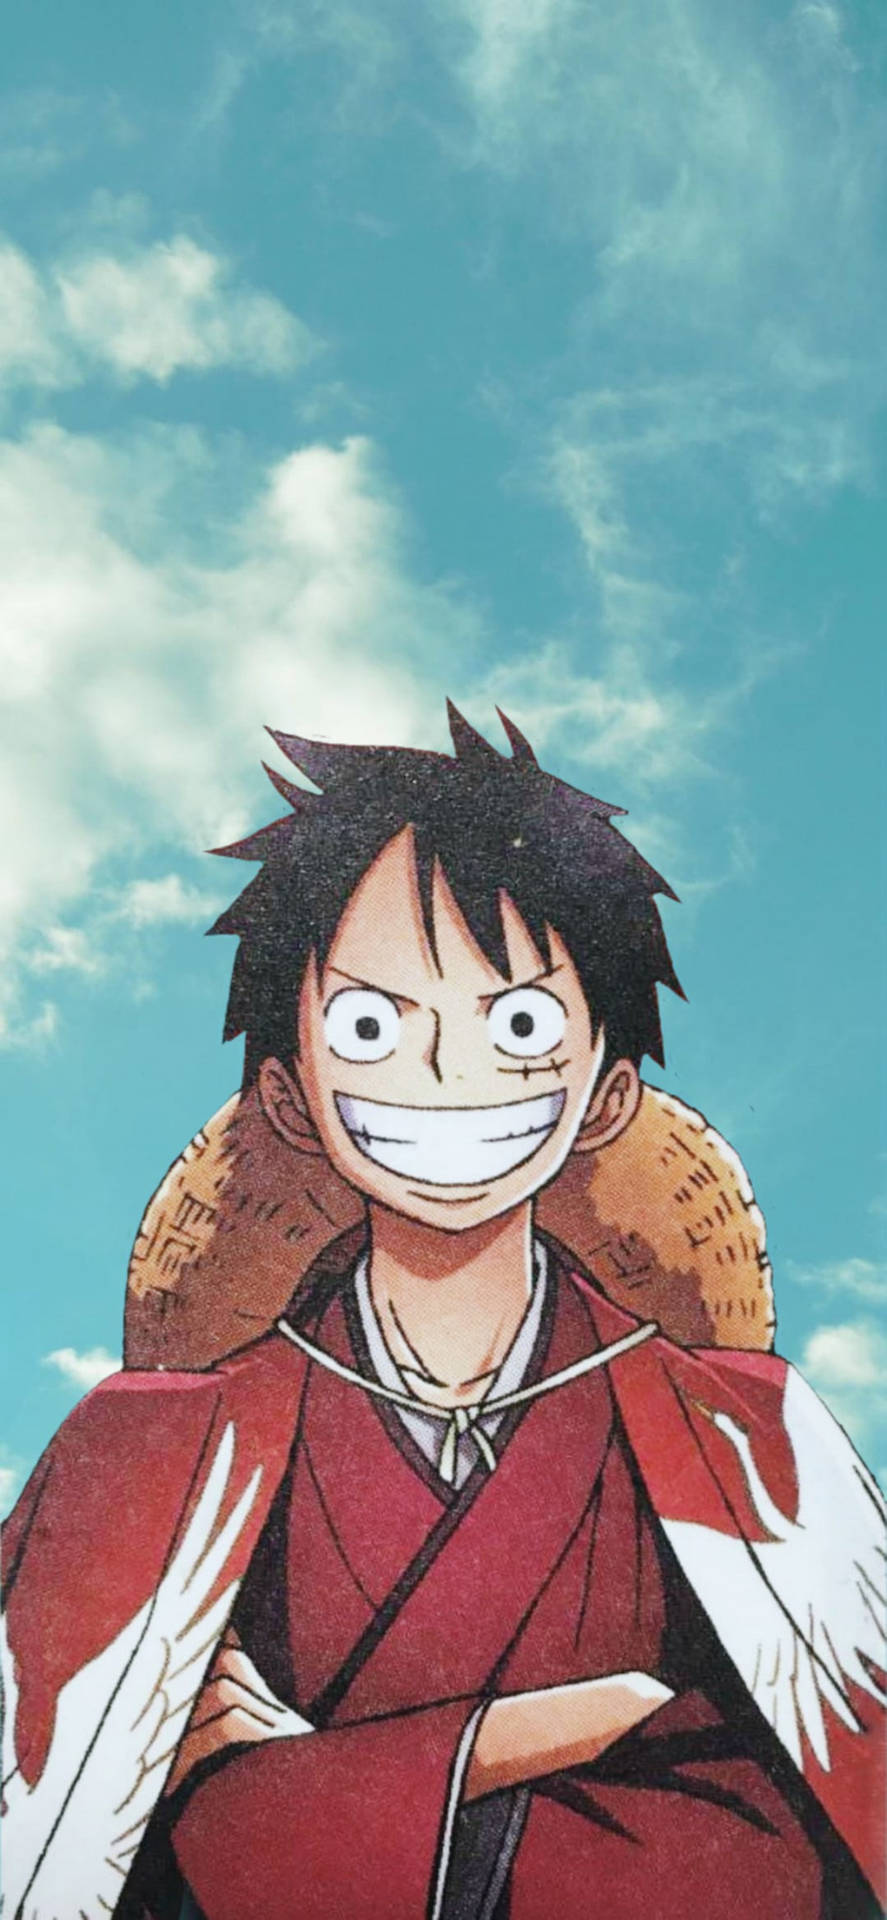 Luffy Aesthetic Under A Cloudy Sky Background